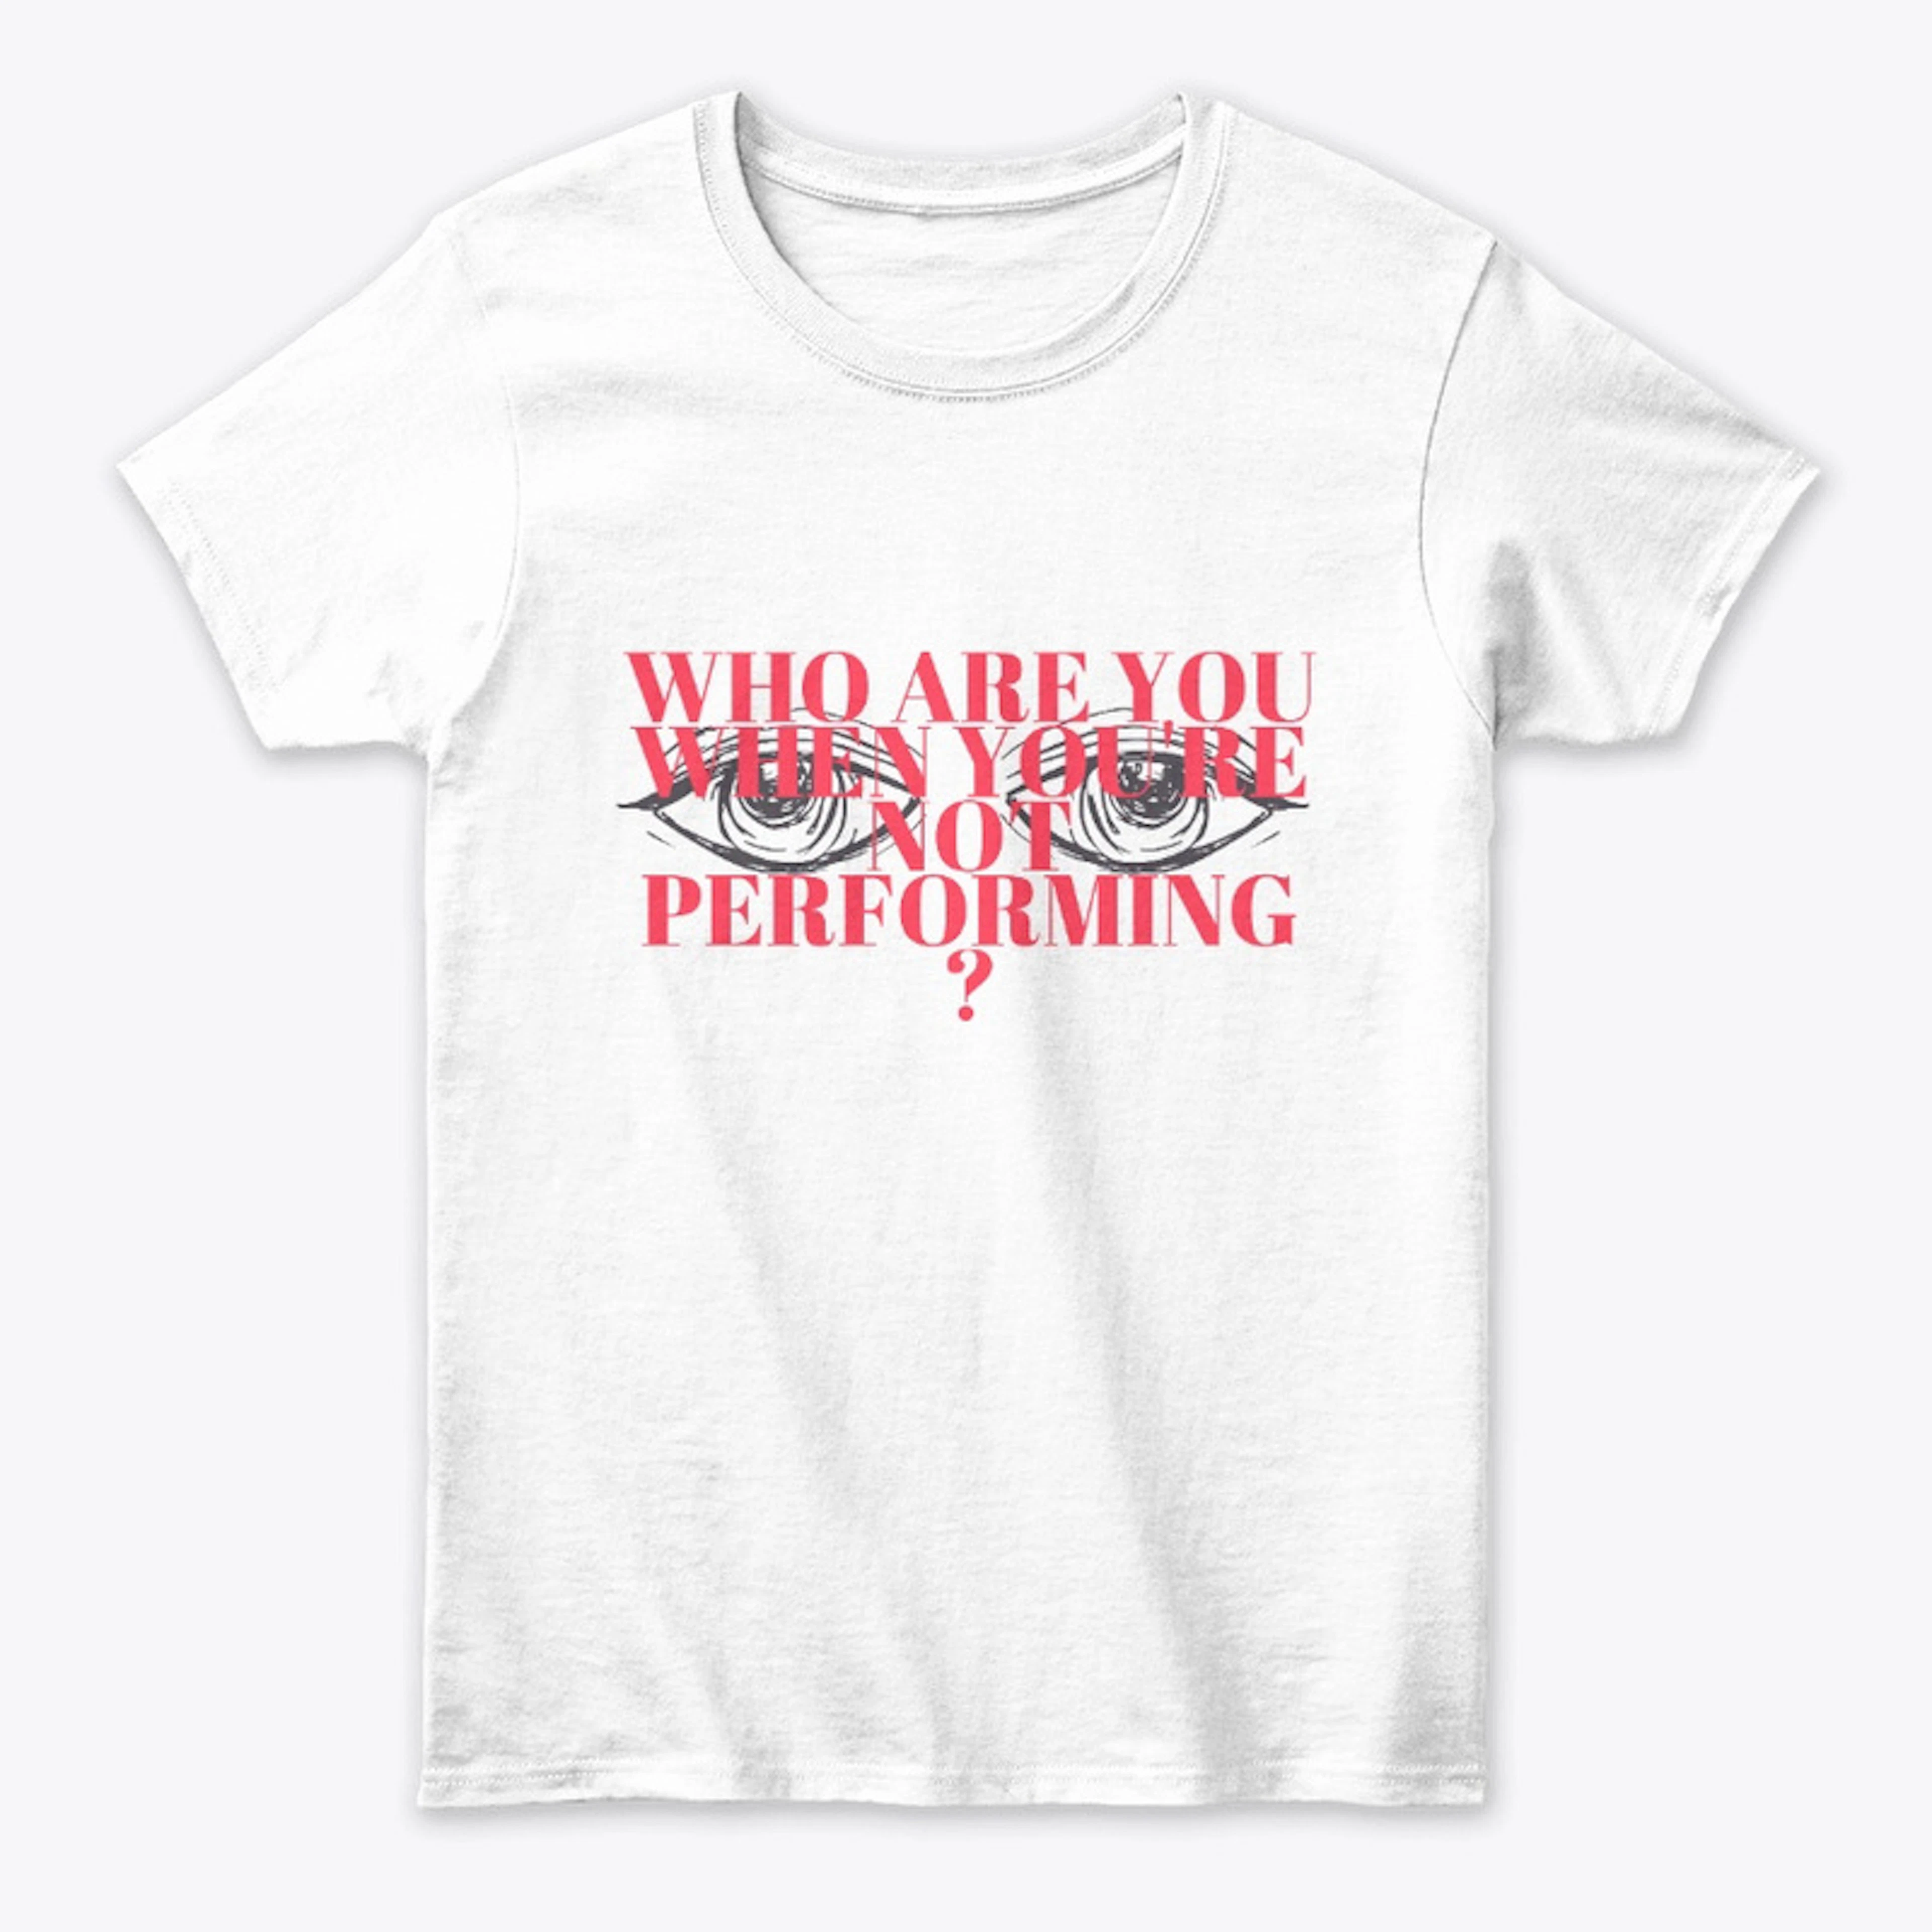 Who Are You When You're Not Performing?